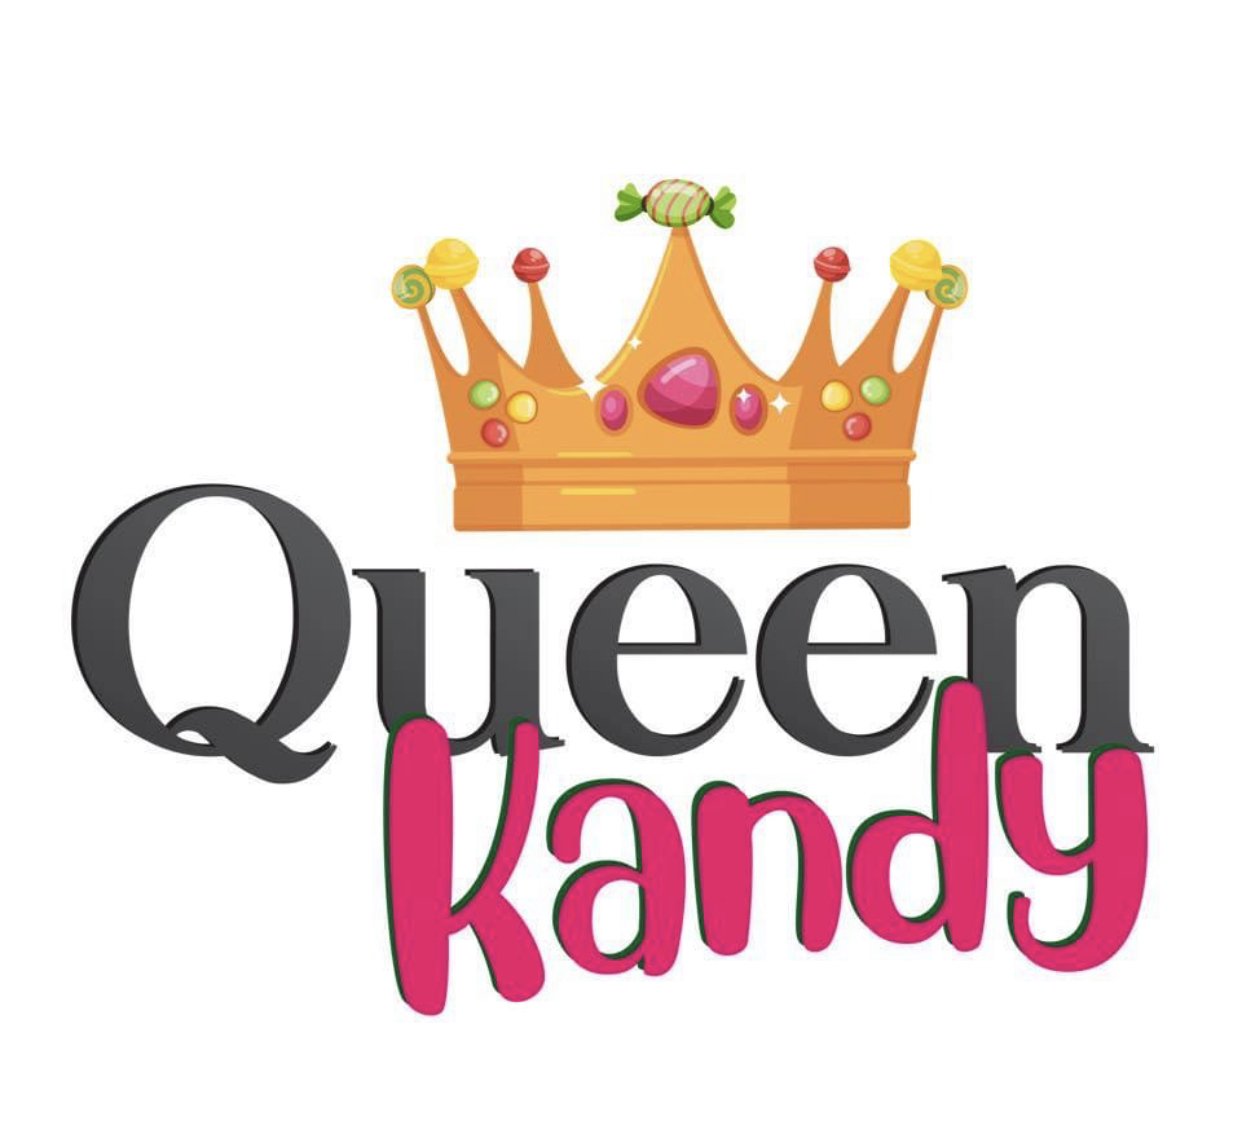 Greeting cards – Queen Kandy Bath